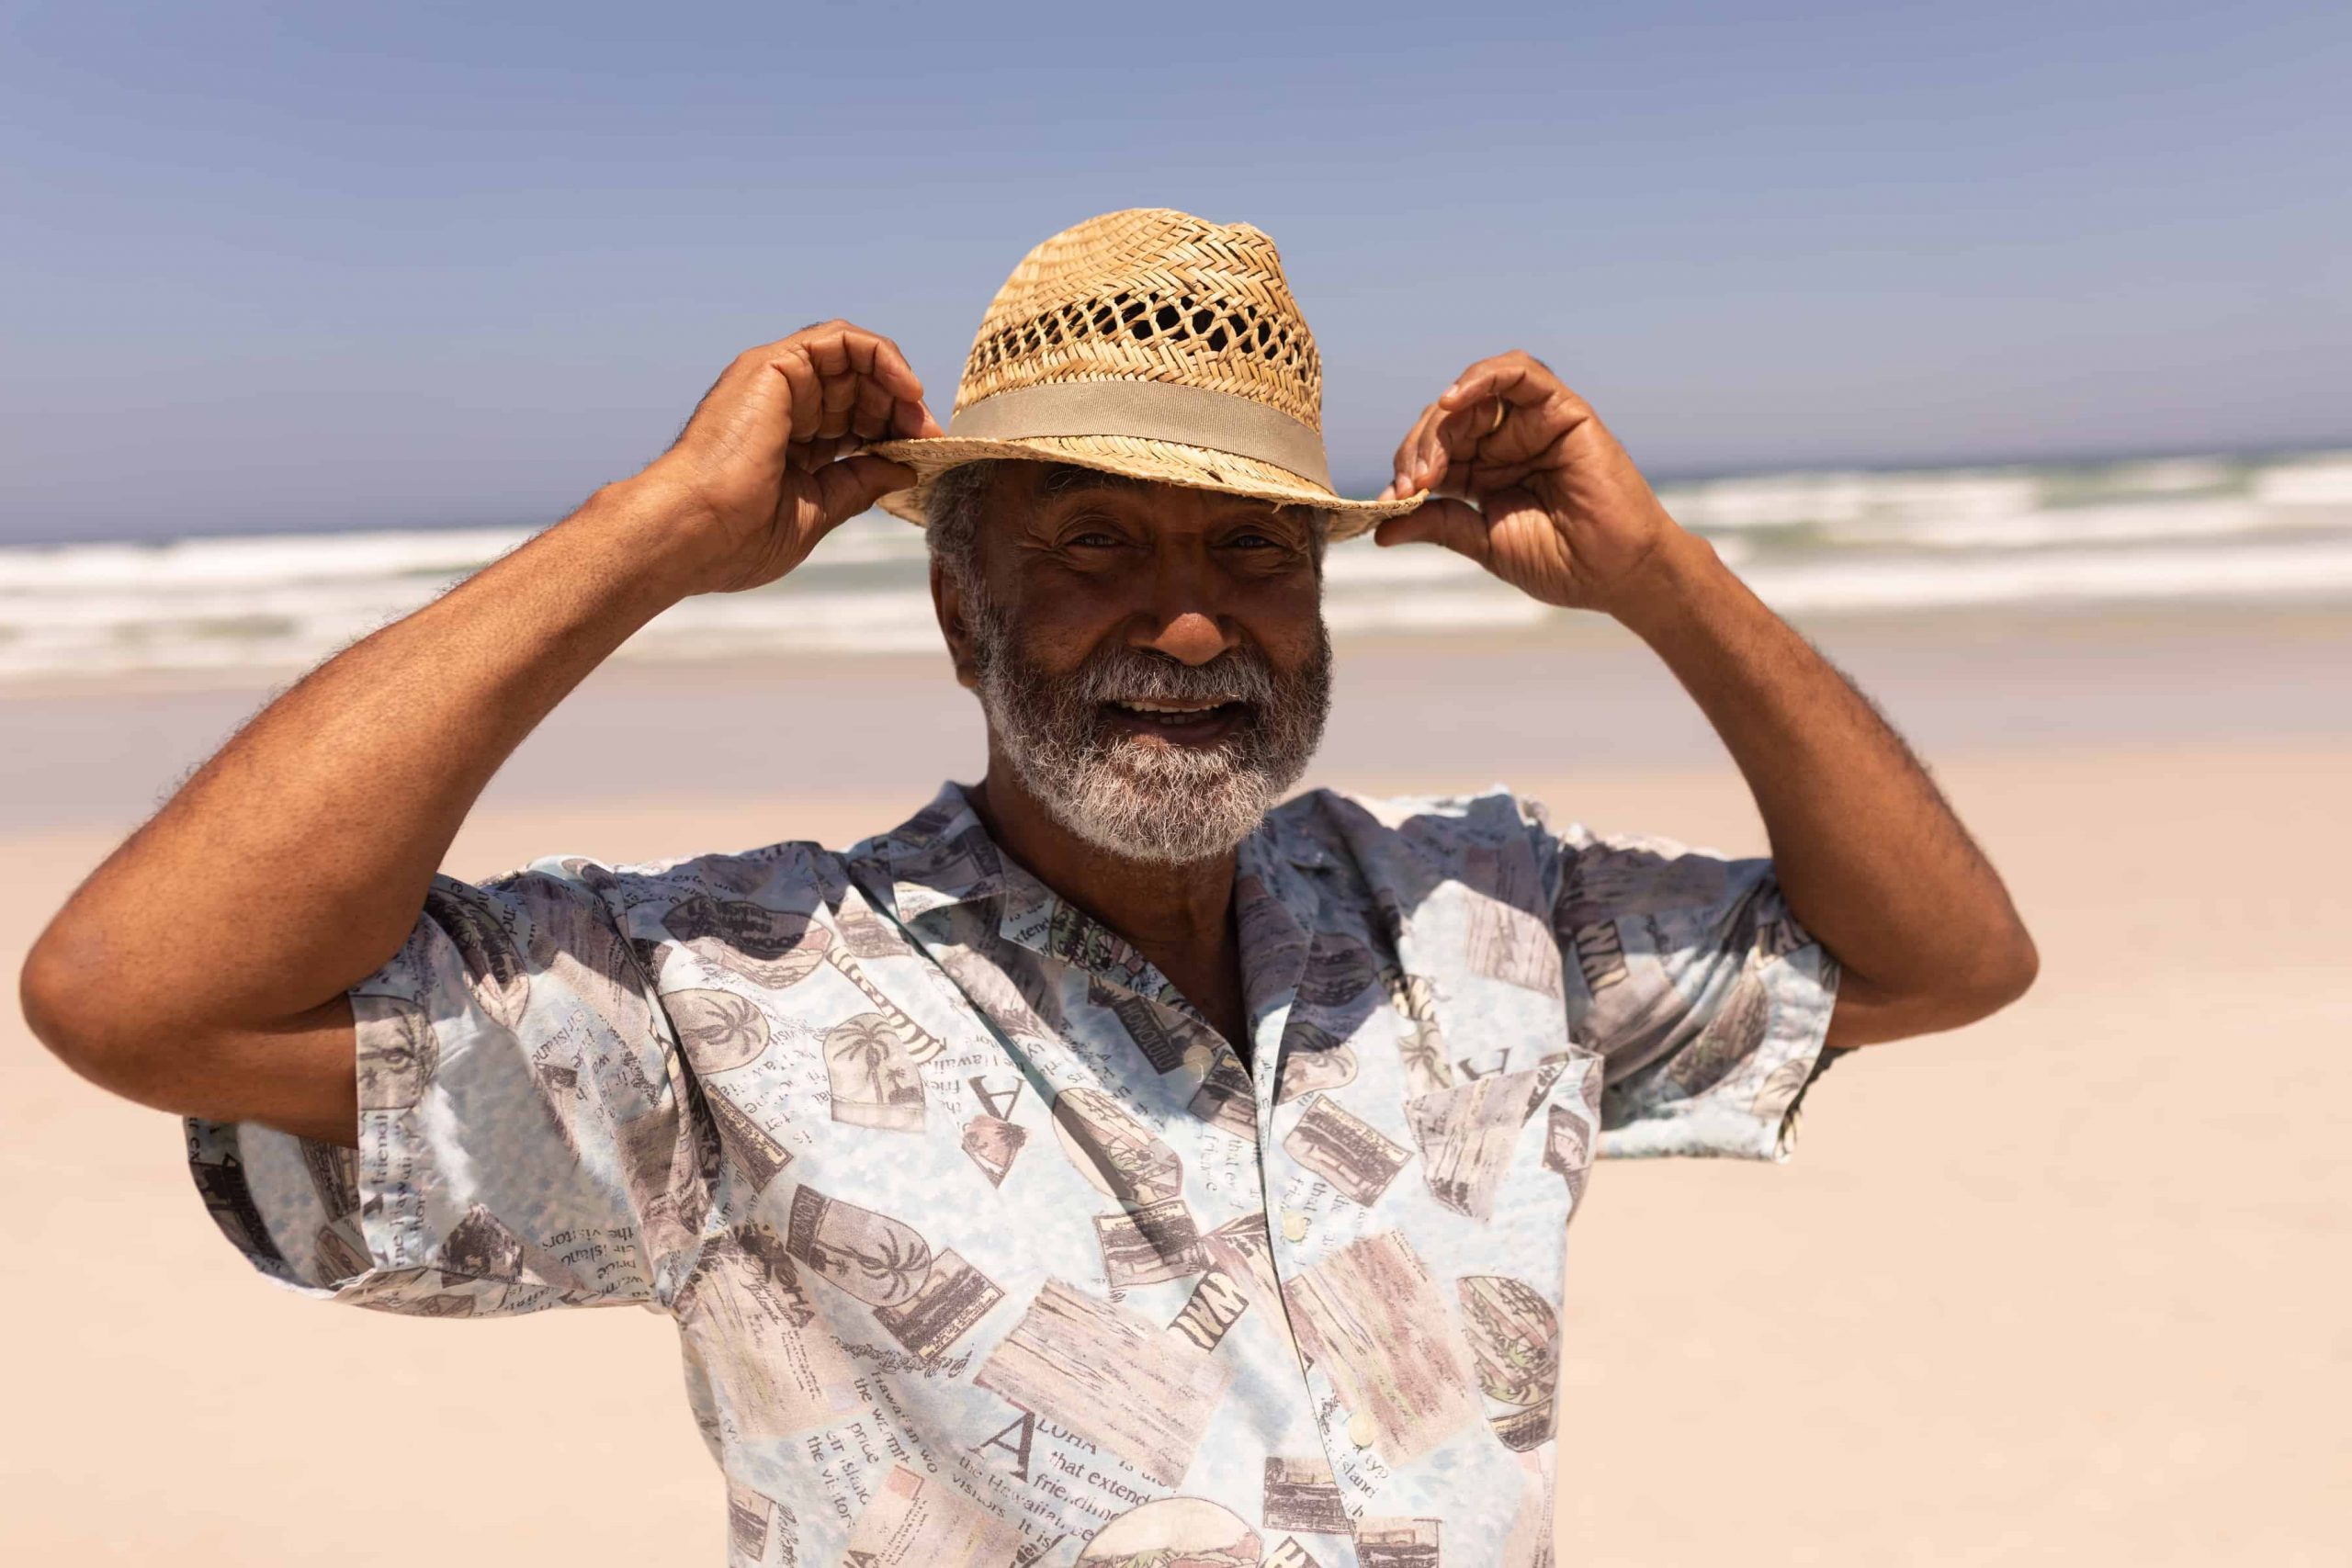 An older man adjusts his hat on a beach, looking retired